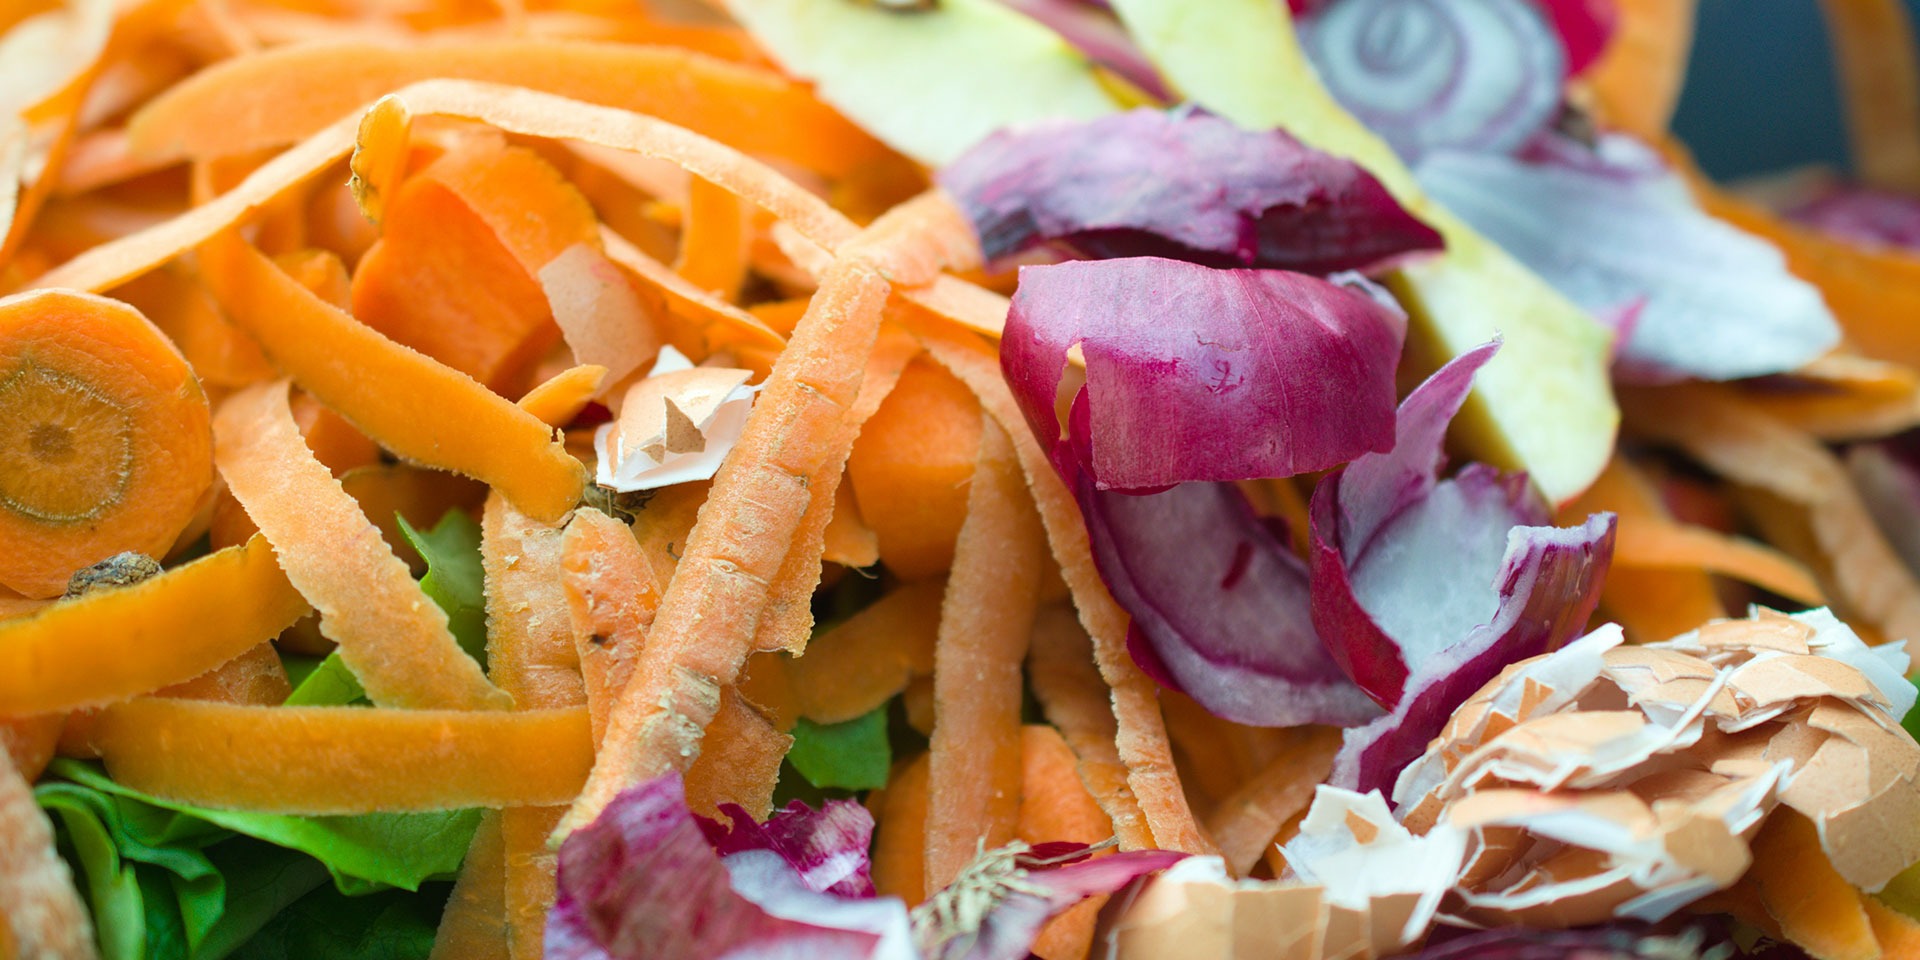 Can Upcycled Foods Impact Food Waste? - FoodPrint